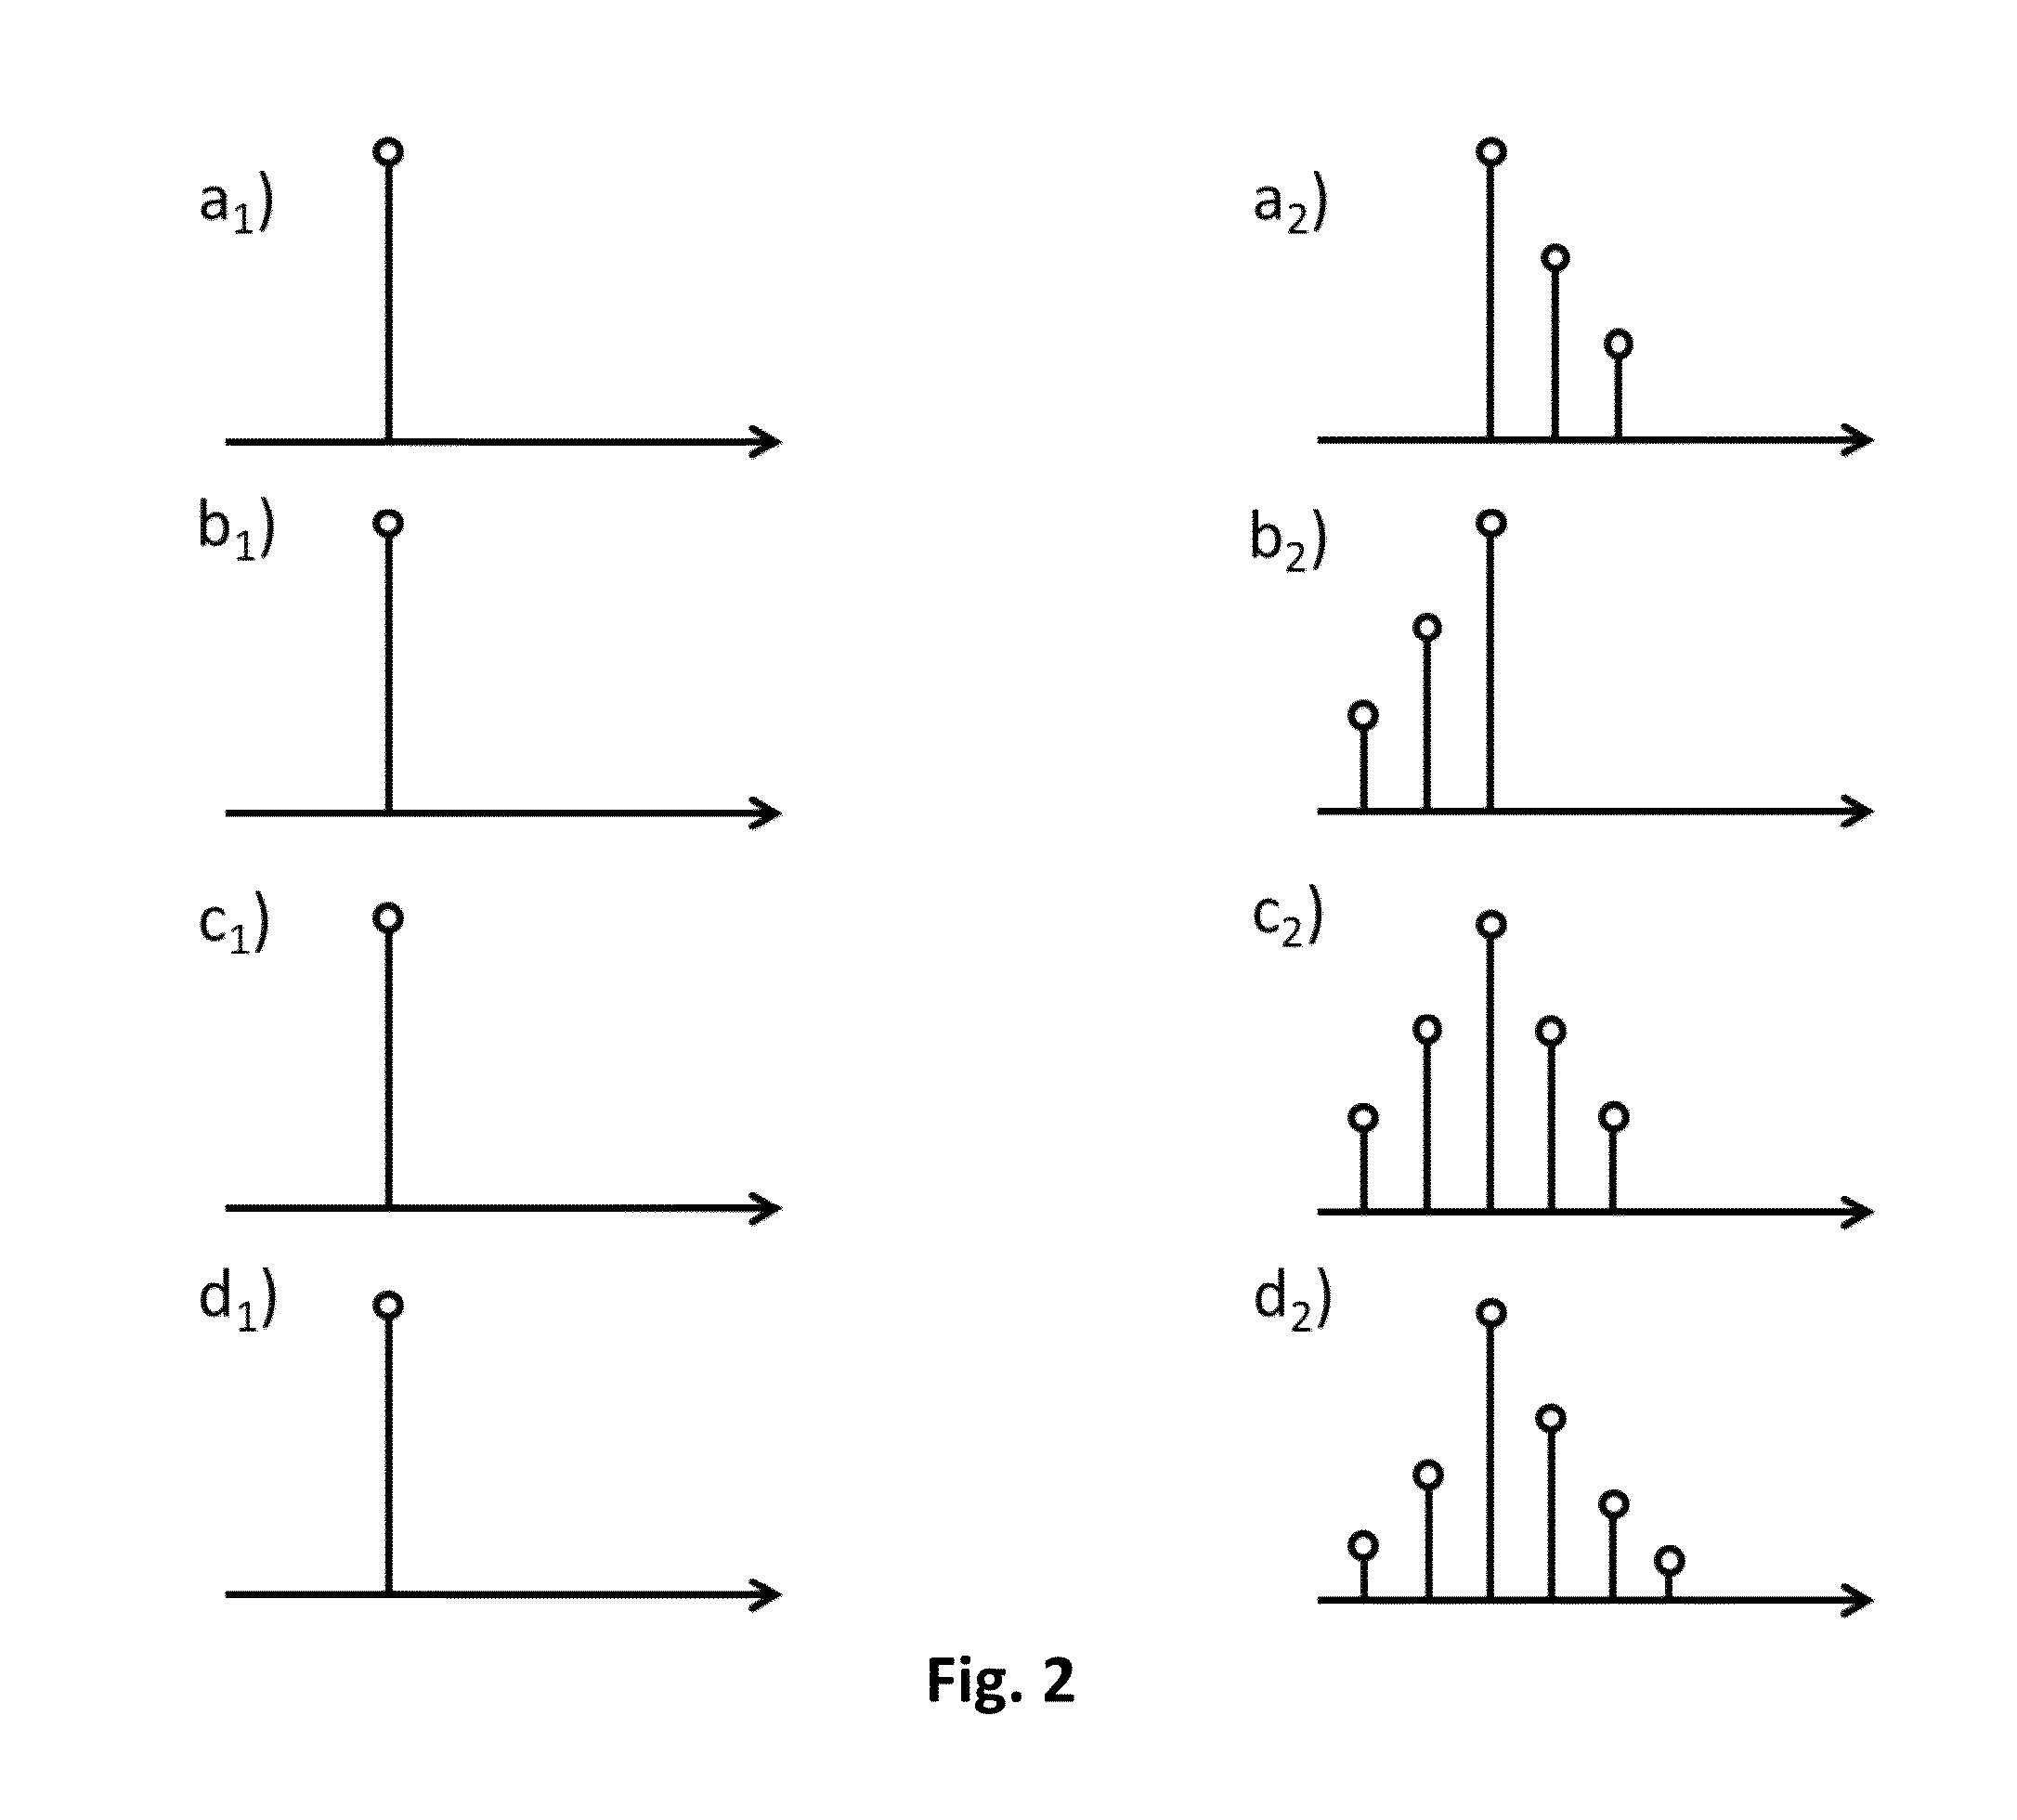 Method for reducing equalizer complexity in communication links